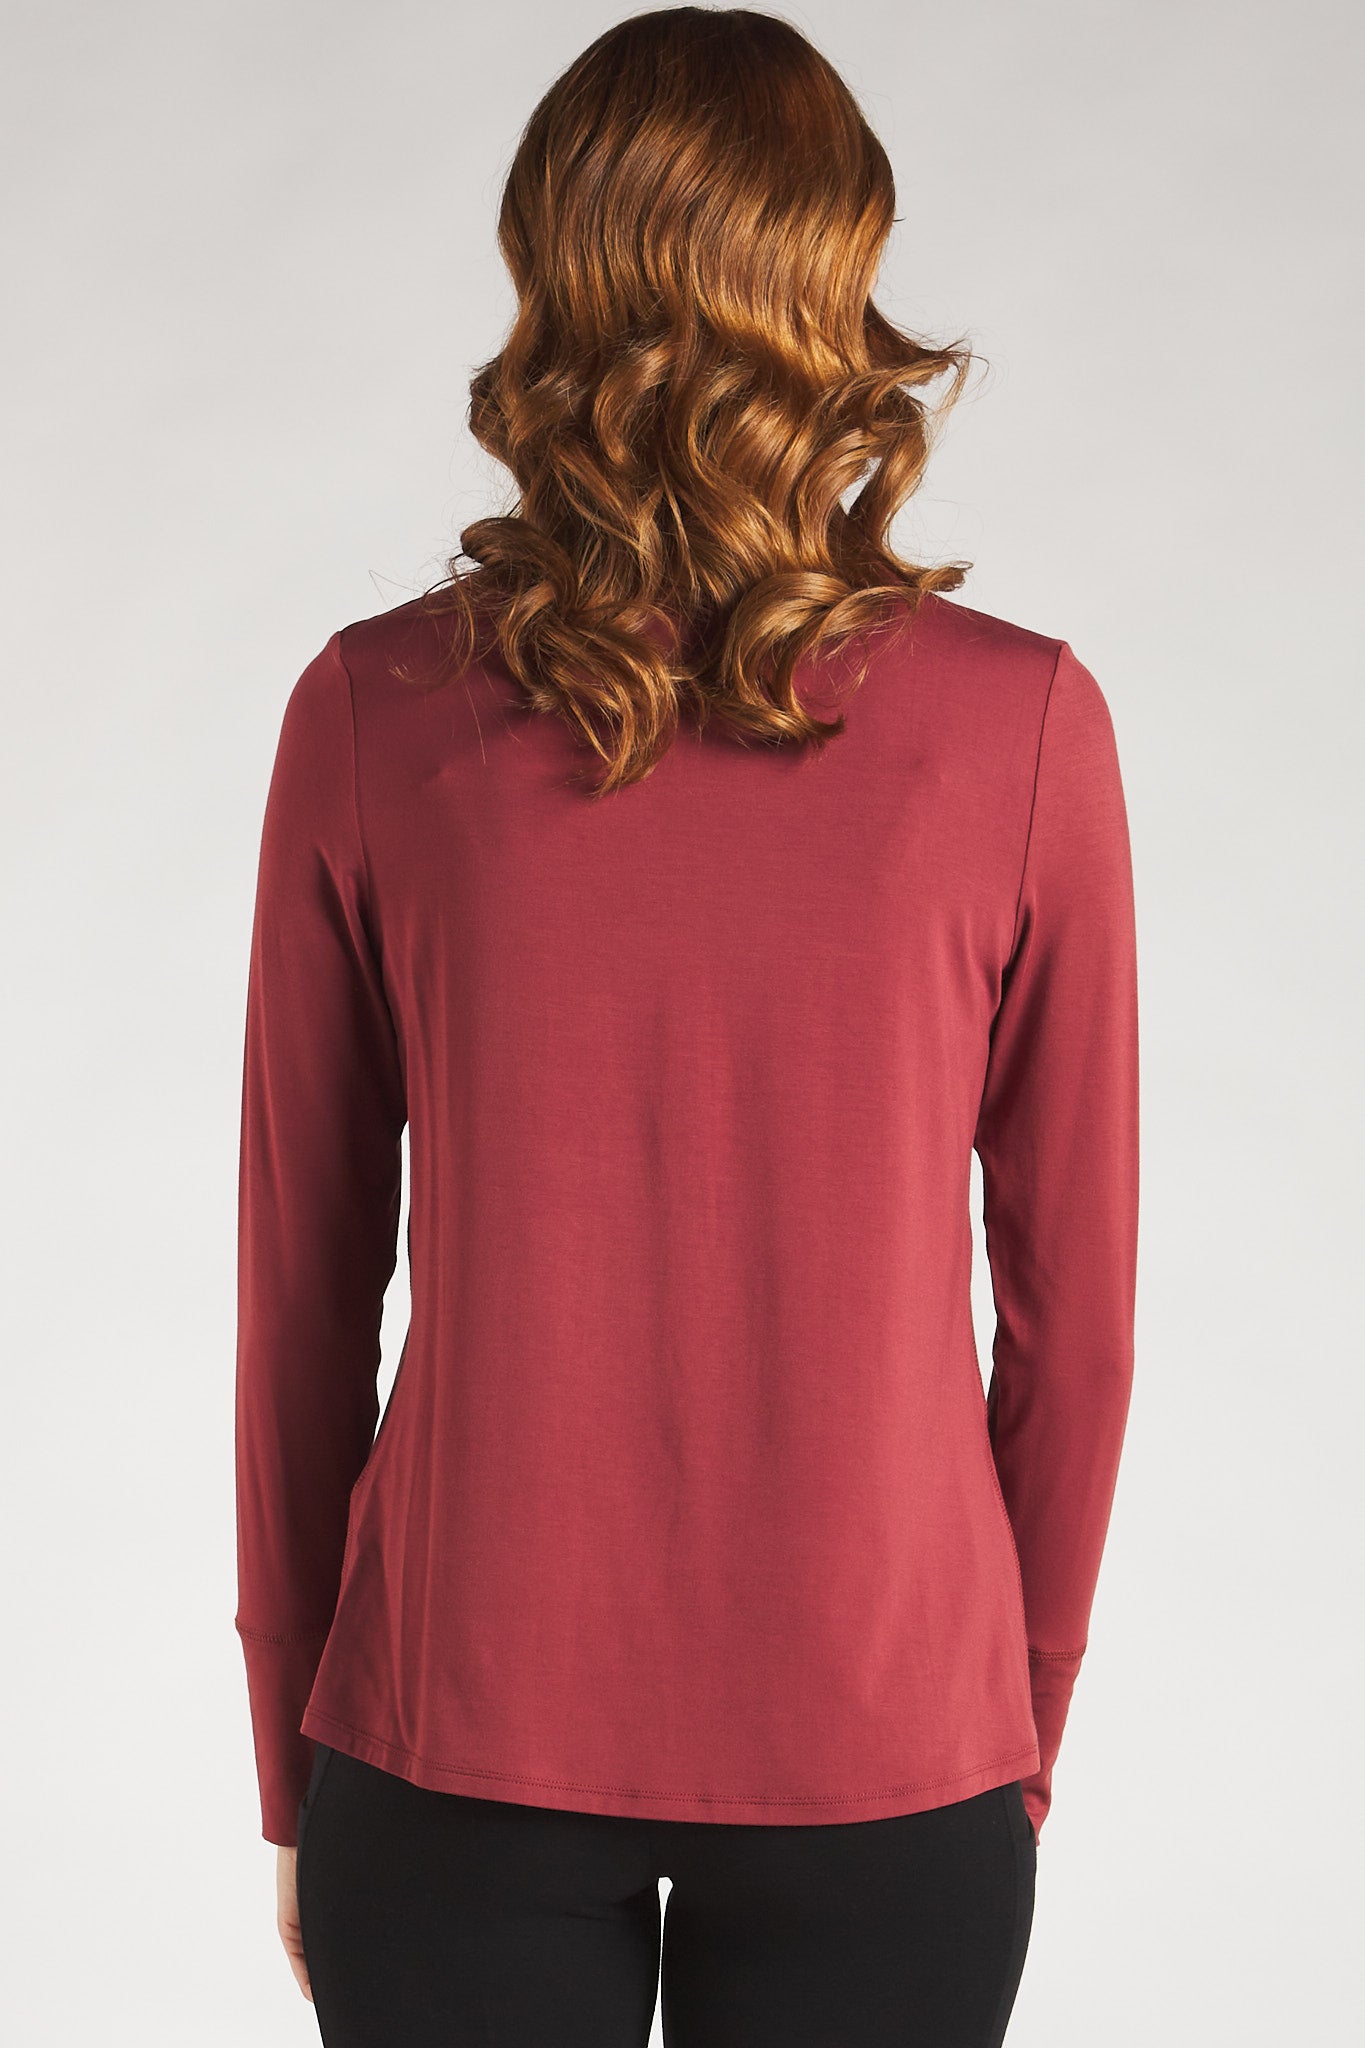 Back view of a woman styling a Rosewood long sleeve turtleneck top from Terrera.